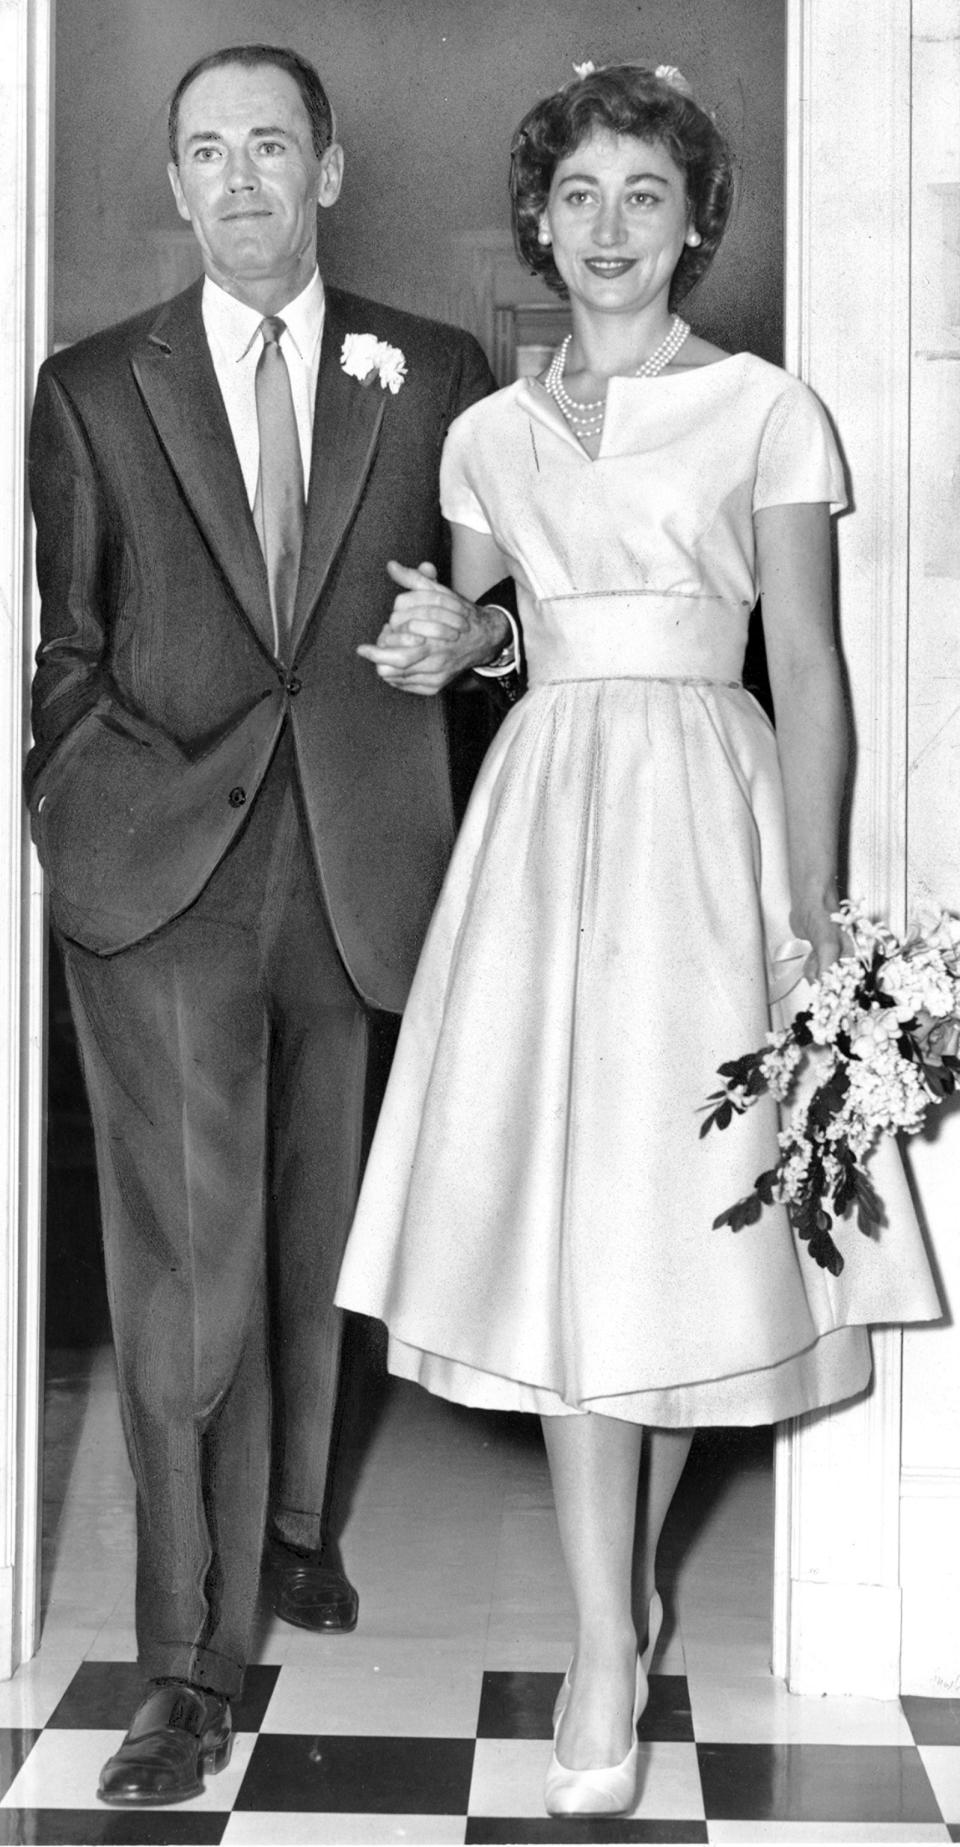 Actor Henry Fonda, 51, and the Italian Baroness Afdera Franchetti, 23, are a happy couple after marriage yesterday at 151 E. 74th St.